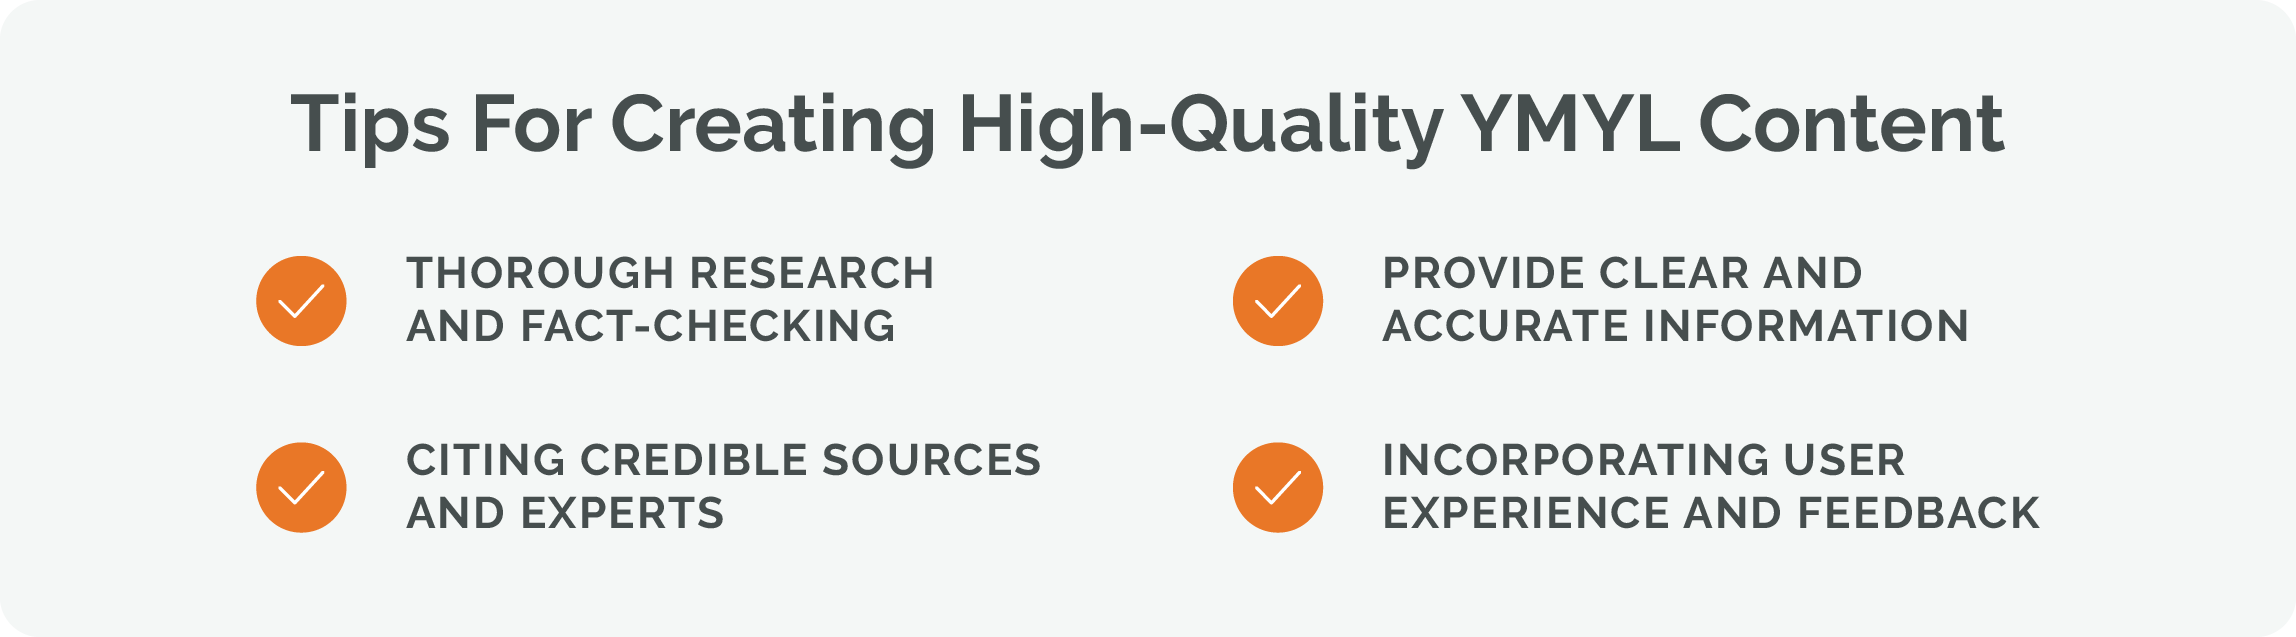 Tips for creating high-quality YMYL content